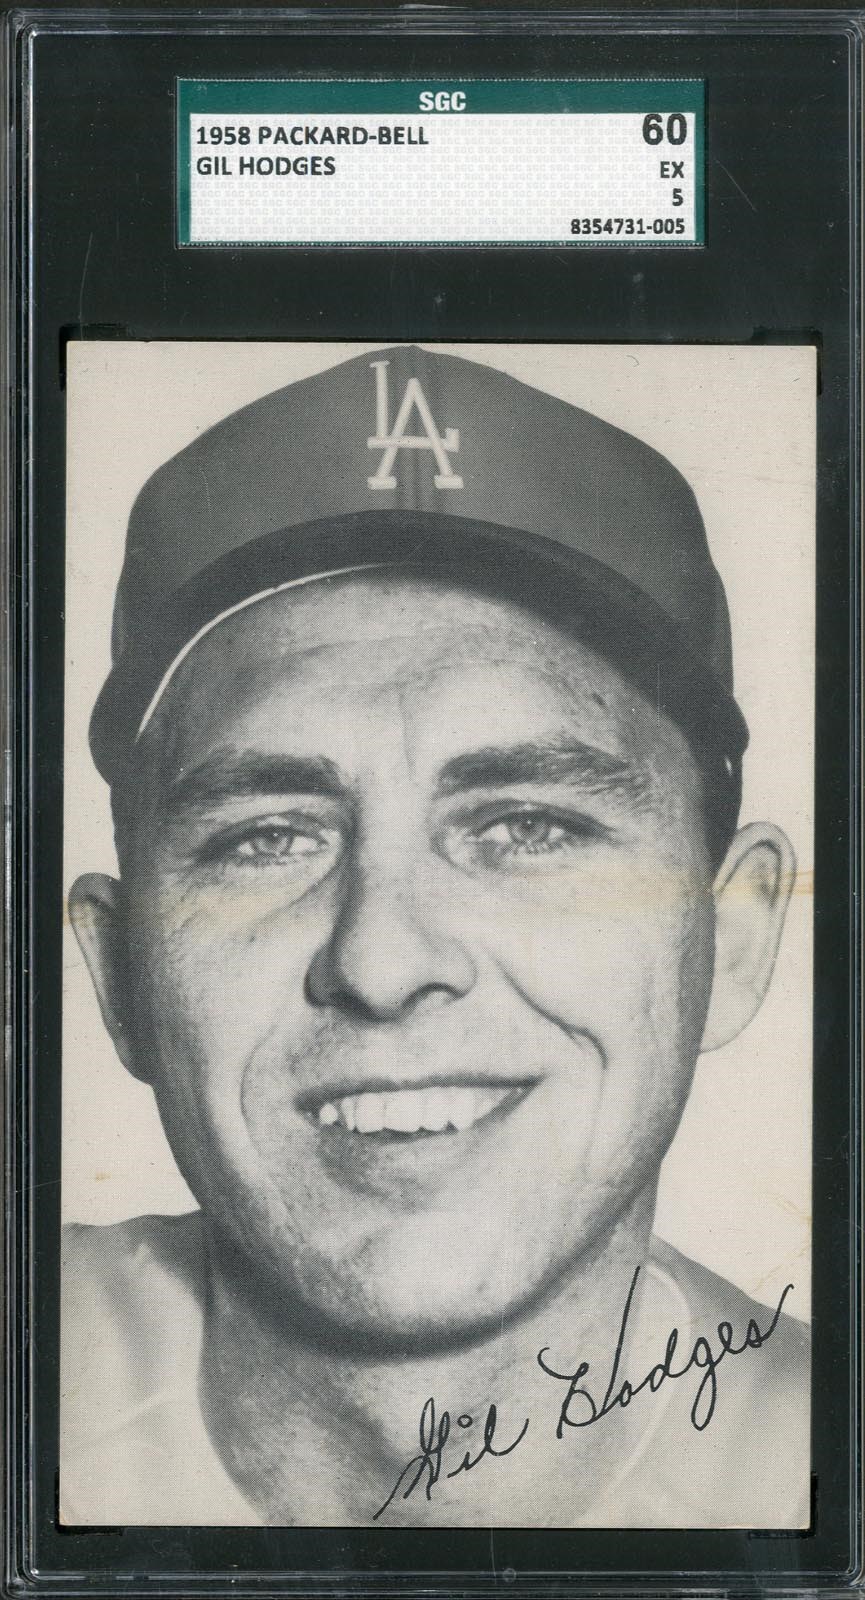 Baseball and Trading Cards - 1958 Packard-Bell Gil Hodges SGC 60 EX 5